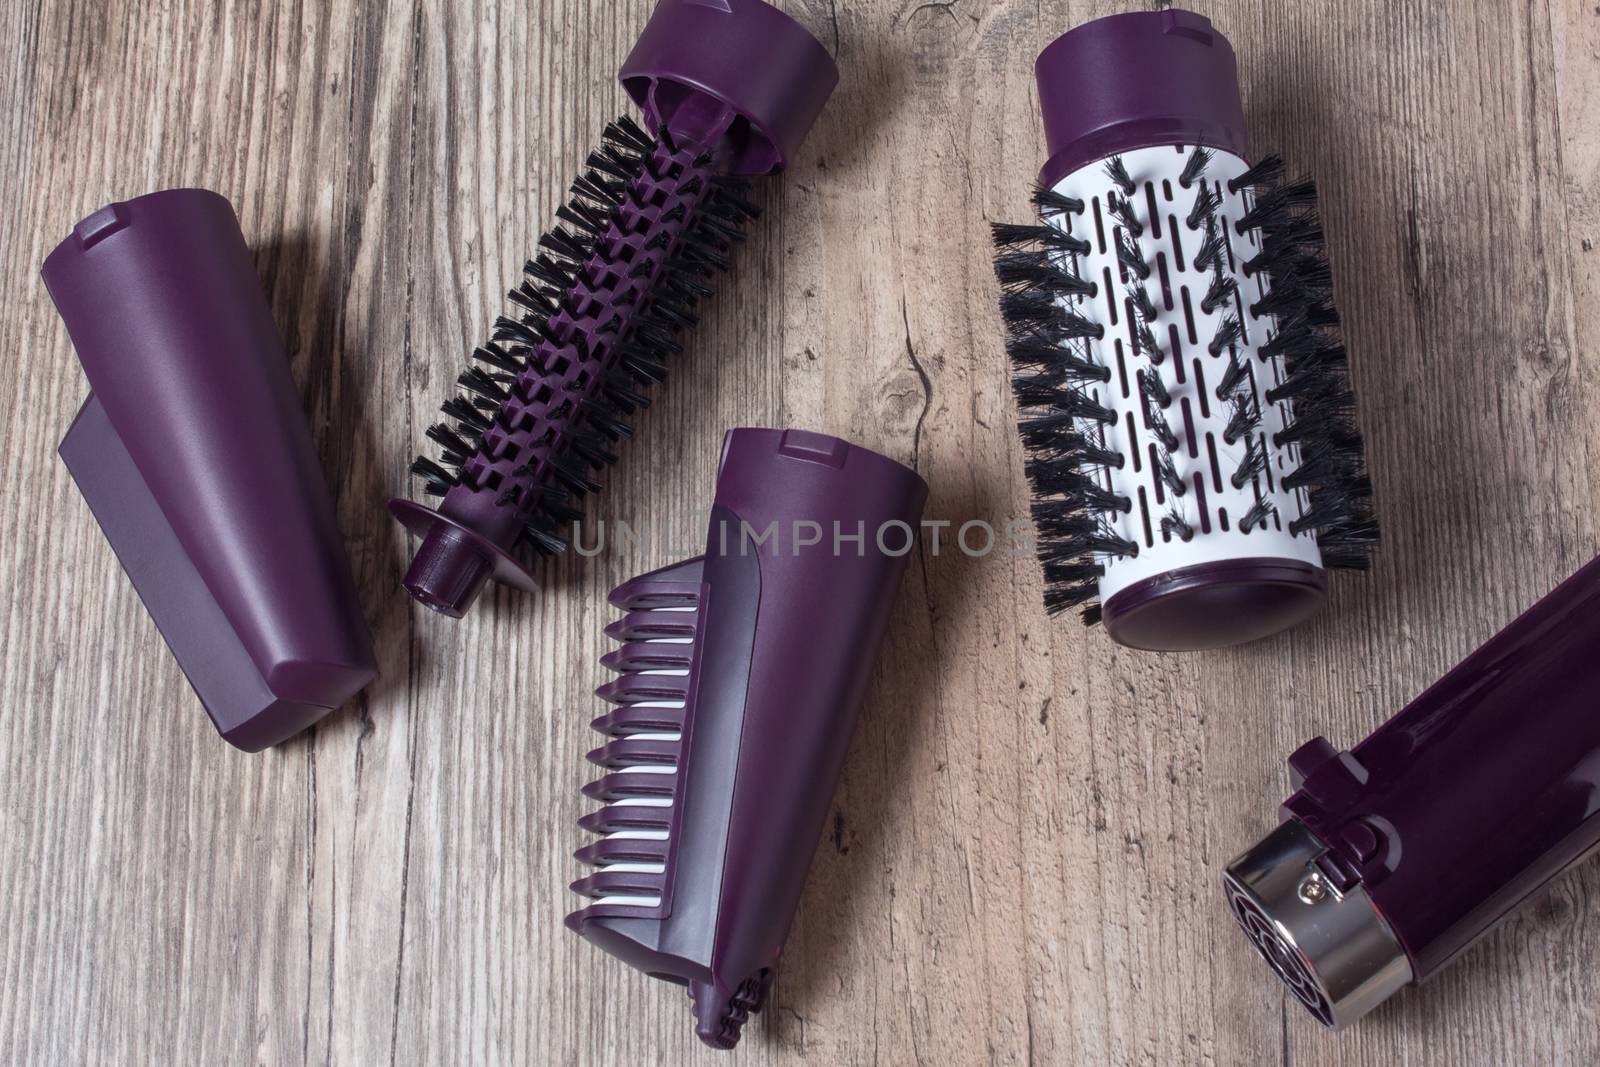 Set of hair dryer attachments on a wooden background. Curling iron, hair straightener. Hot styling, boar bristles, hair care. Beauty salon, styling, haircut. Beauty, fashion, style.